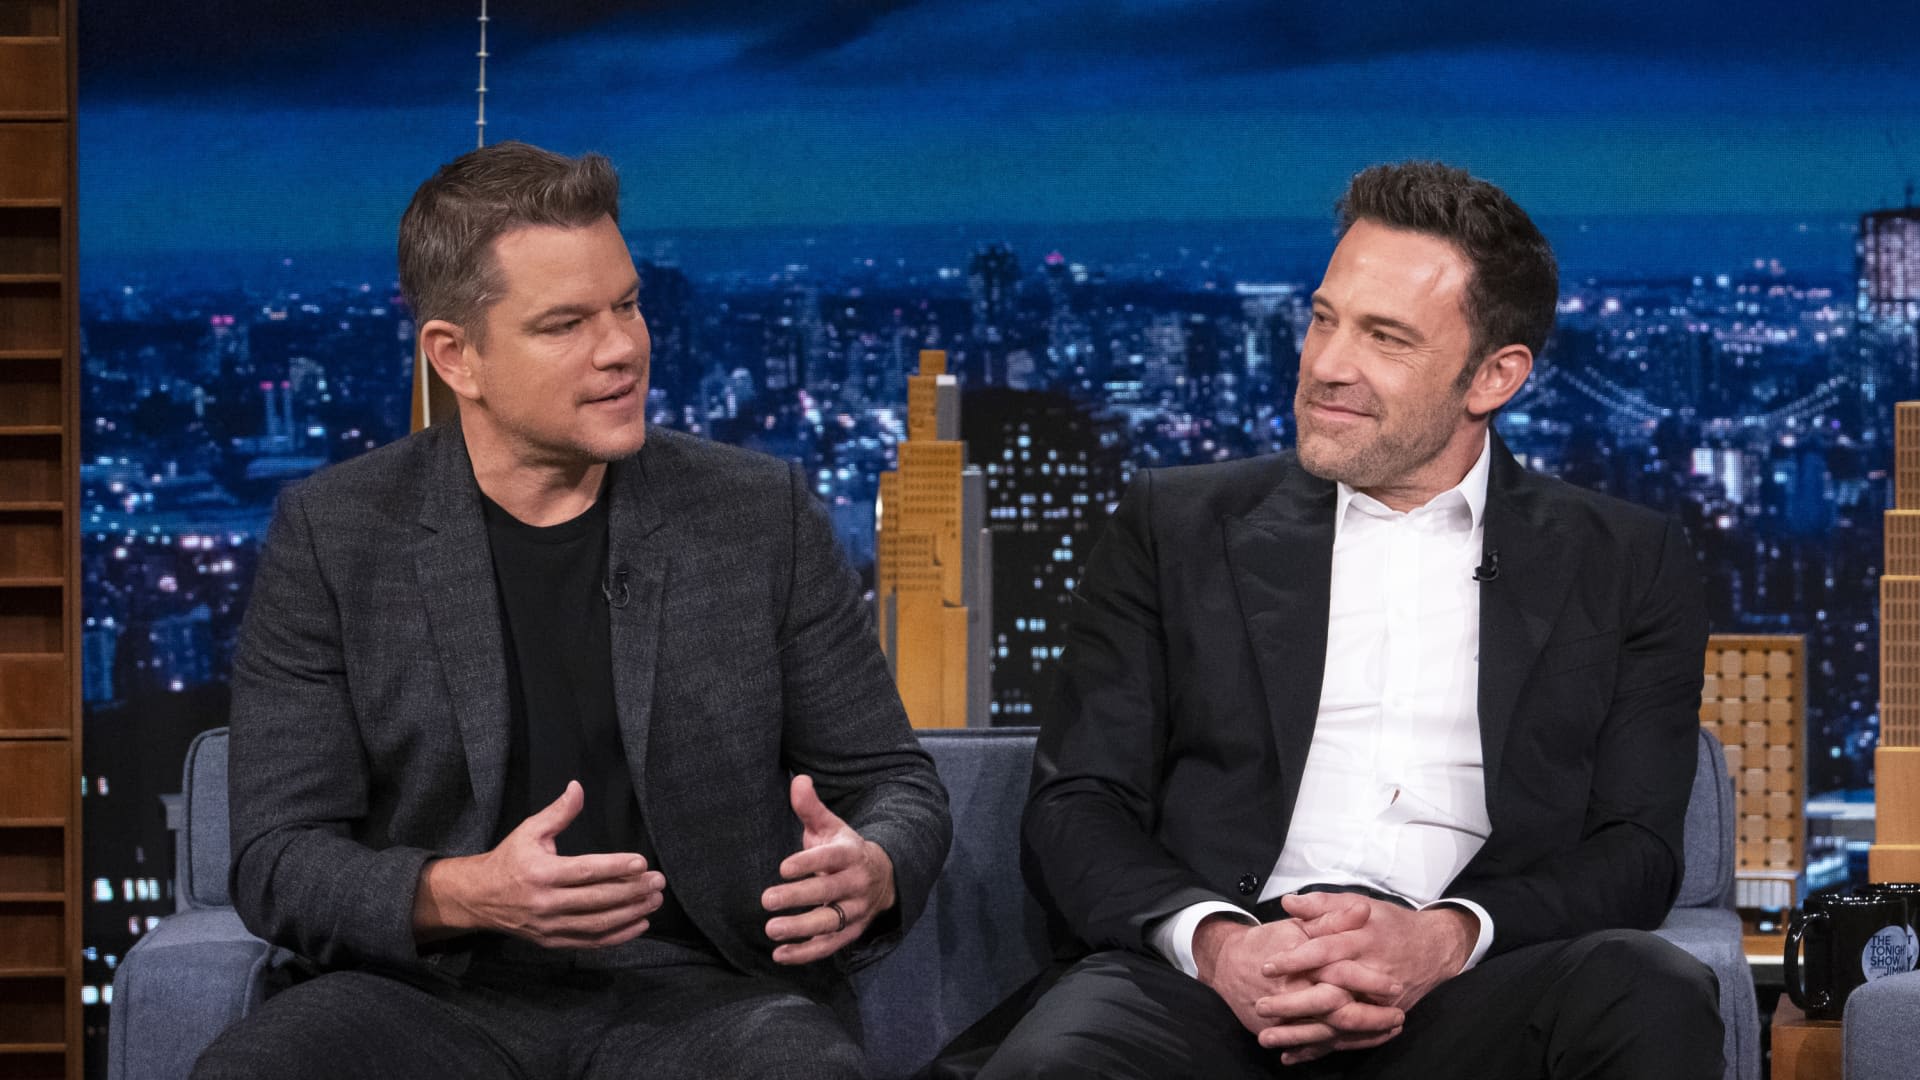 Ben Affleck was sleeping on Matt Damon's couch when 'Good Will Hunting' script sold for $650,000